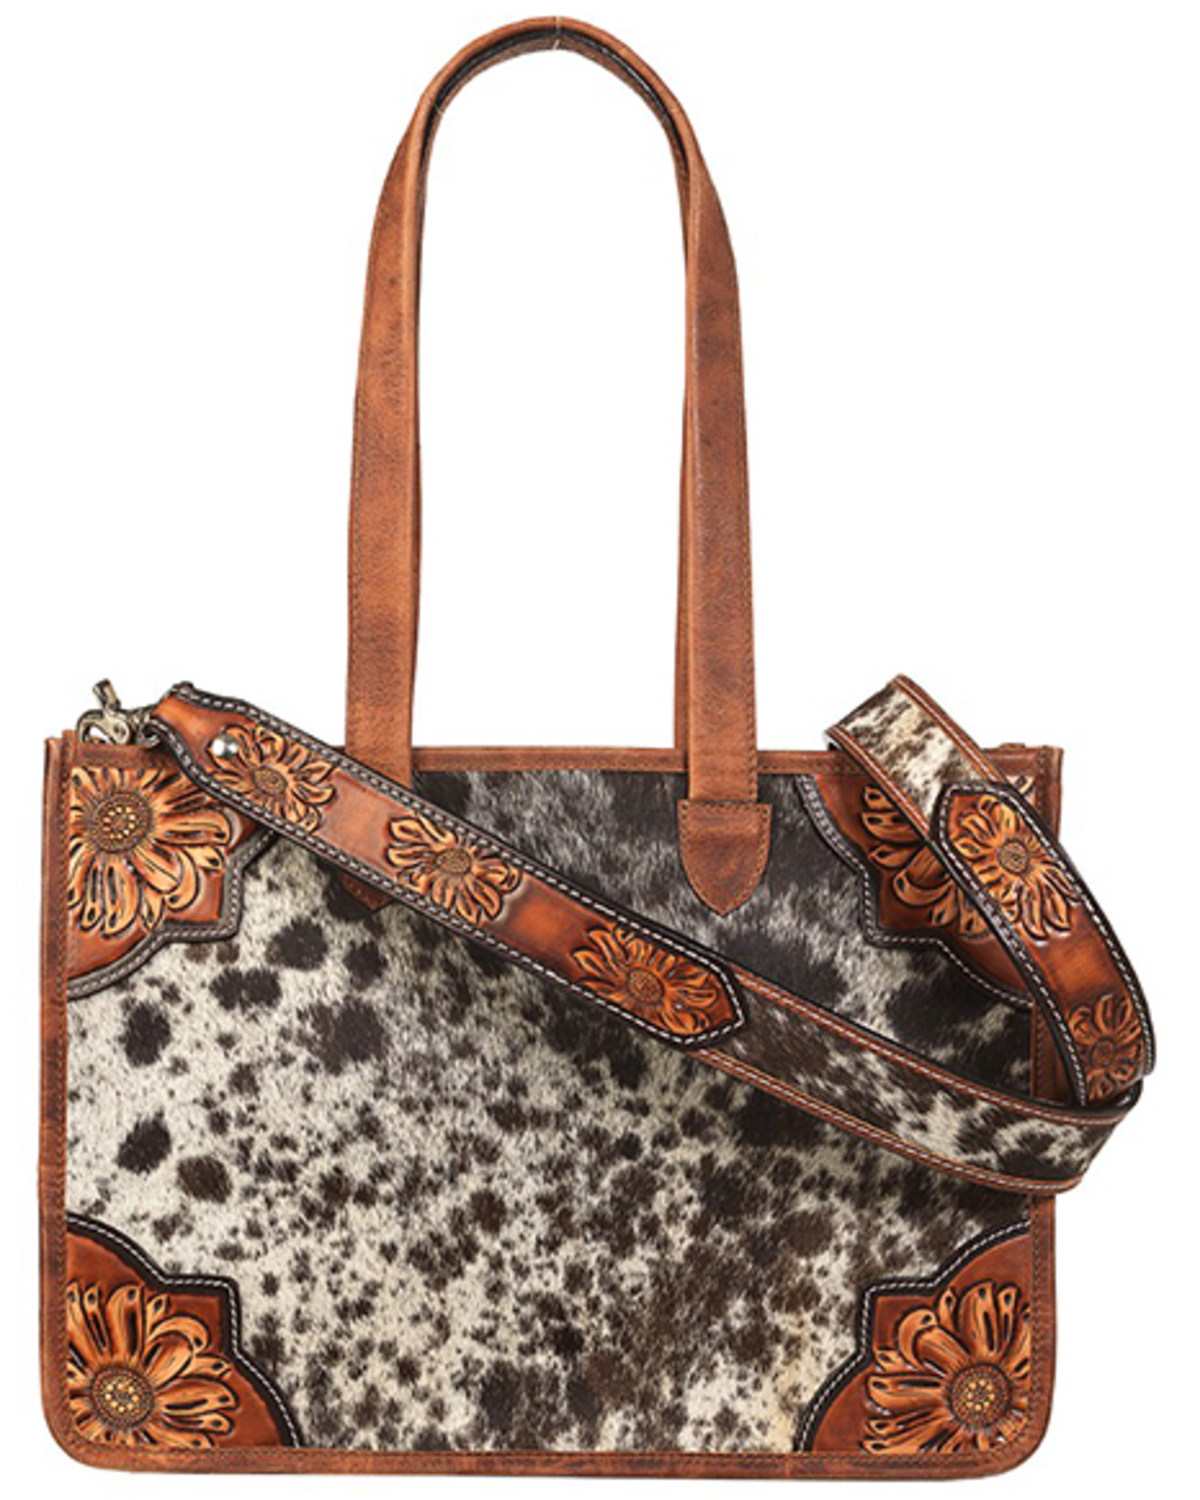 Angel Ranch Women's Spotted Calf Hair Crossbody Tote